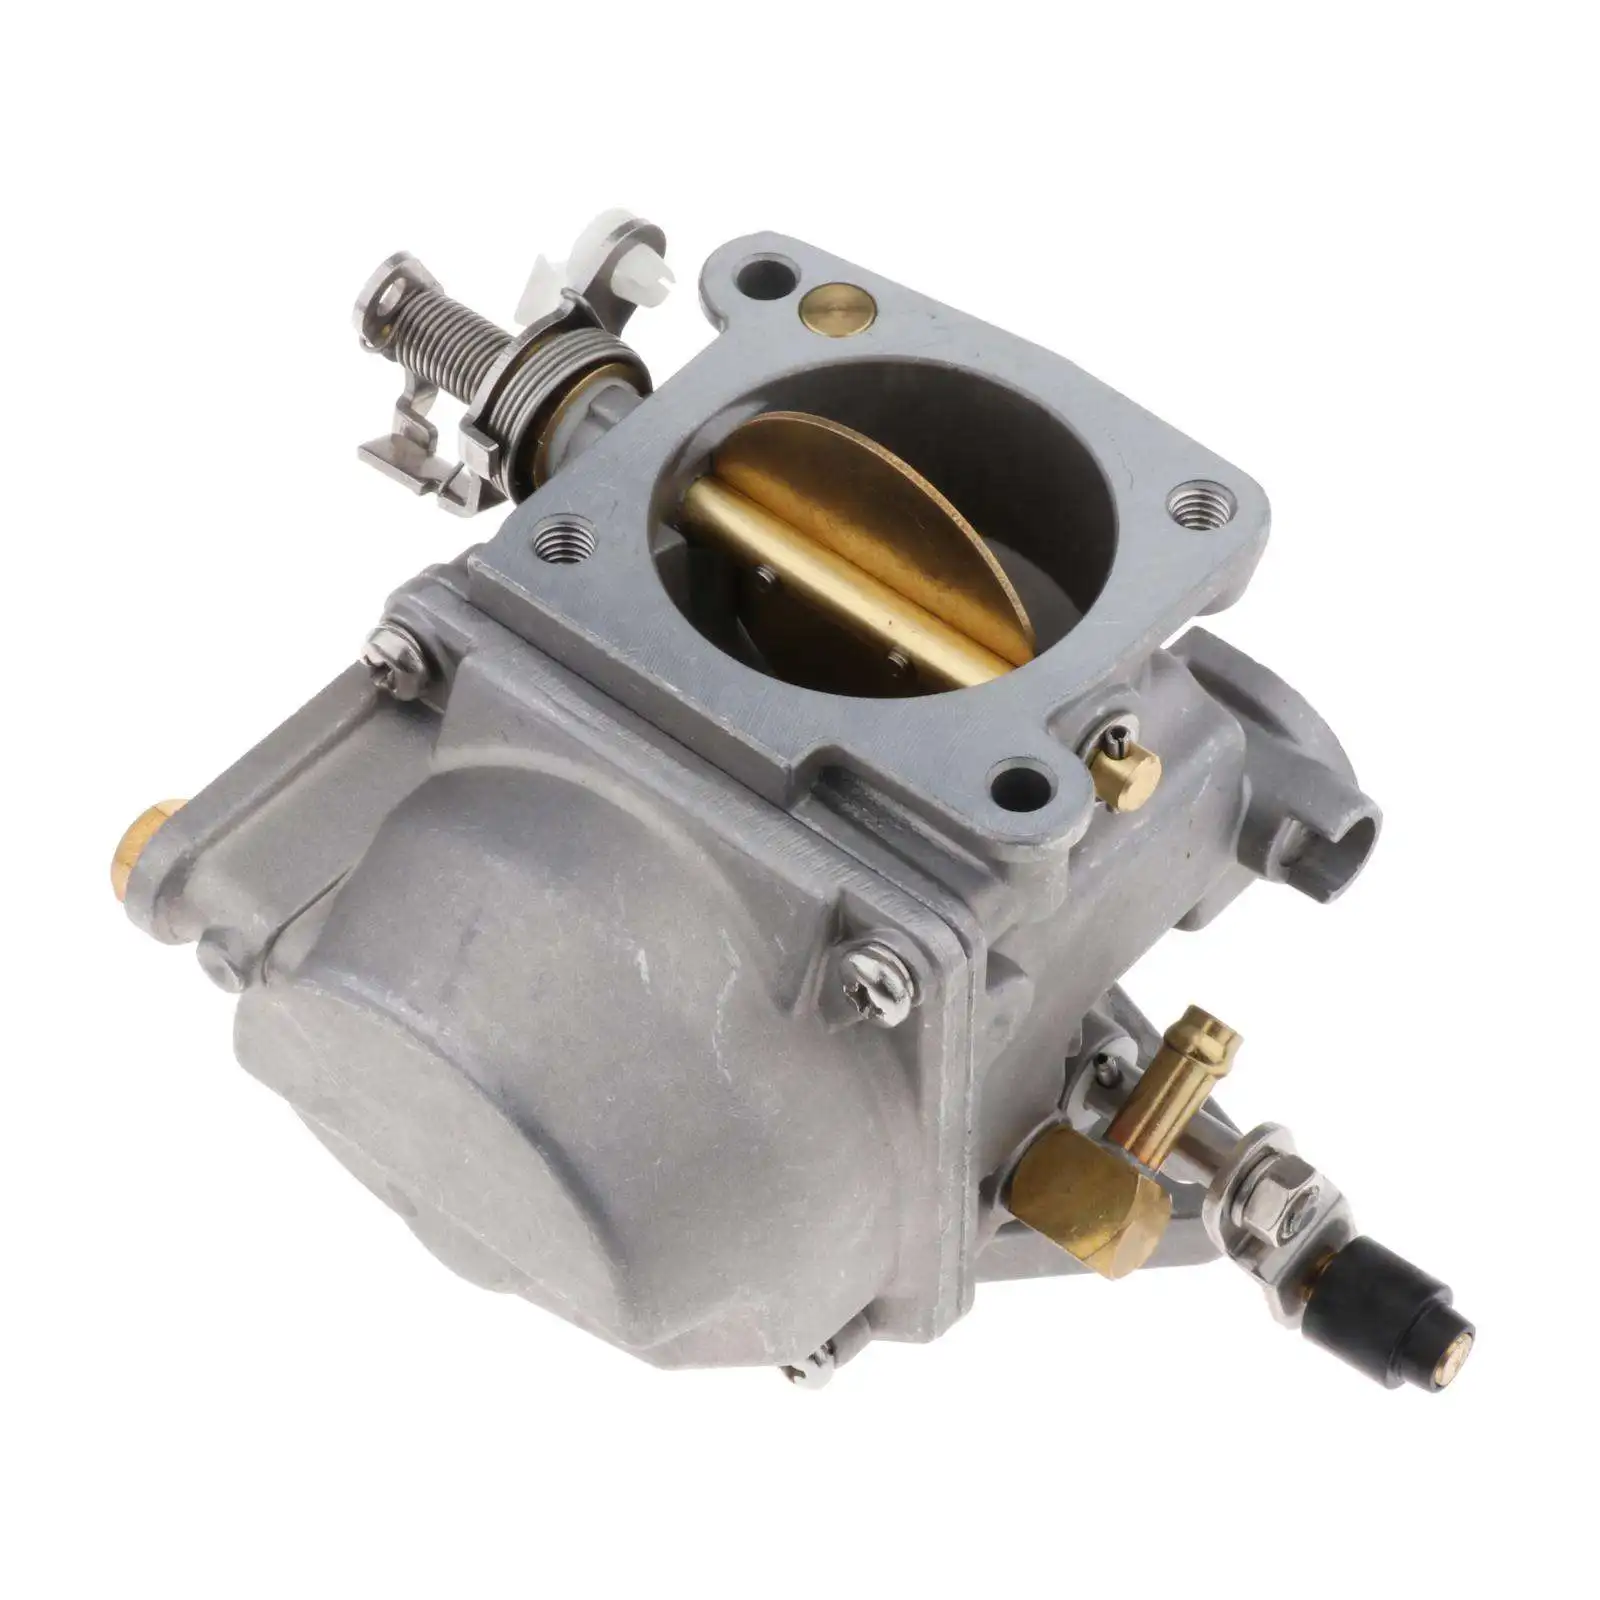 Carburetor Carb Assy For Tohatsu   25HP M25C 30HP M30A 25C3 30A4 2-Stroke 2 Cylinder Outboard Engine 3P0032000 3P0032000M